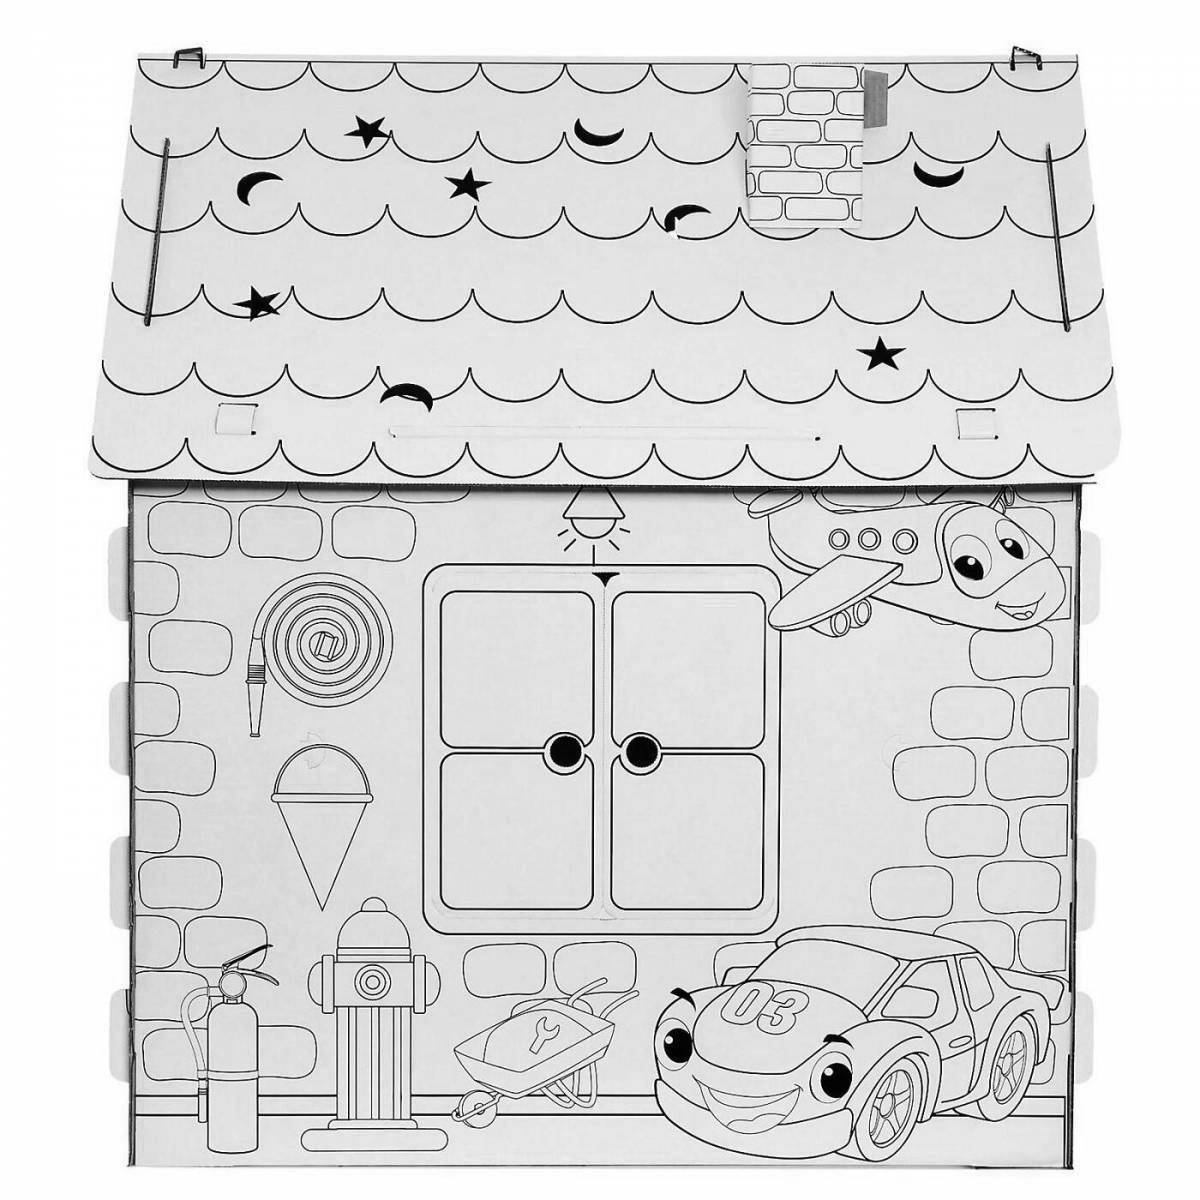 Coloring book exquisite cardboard house